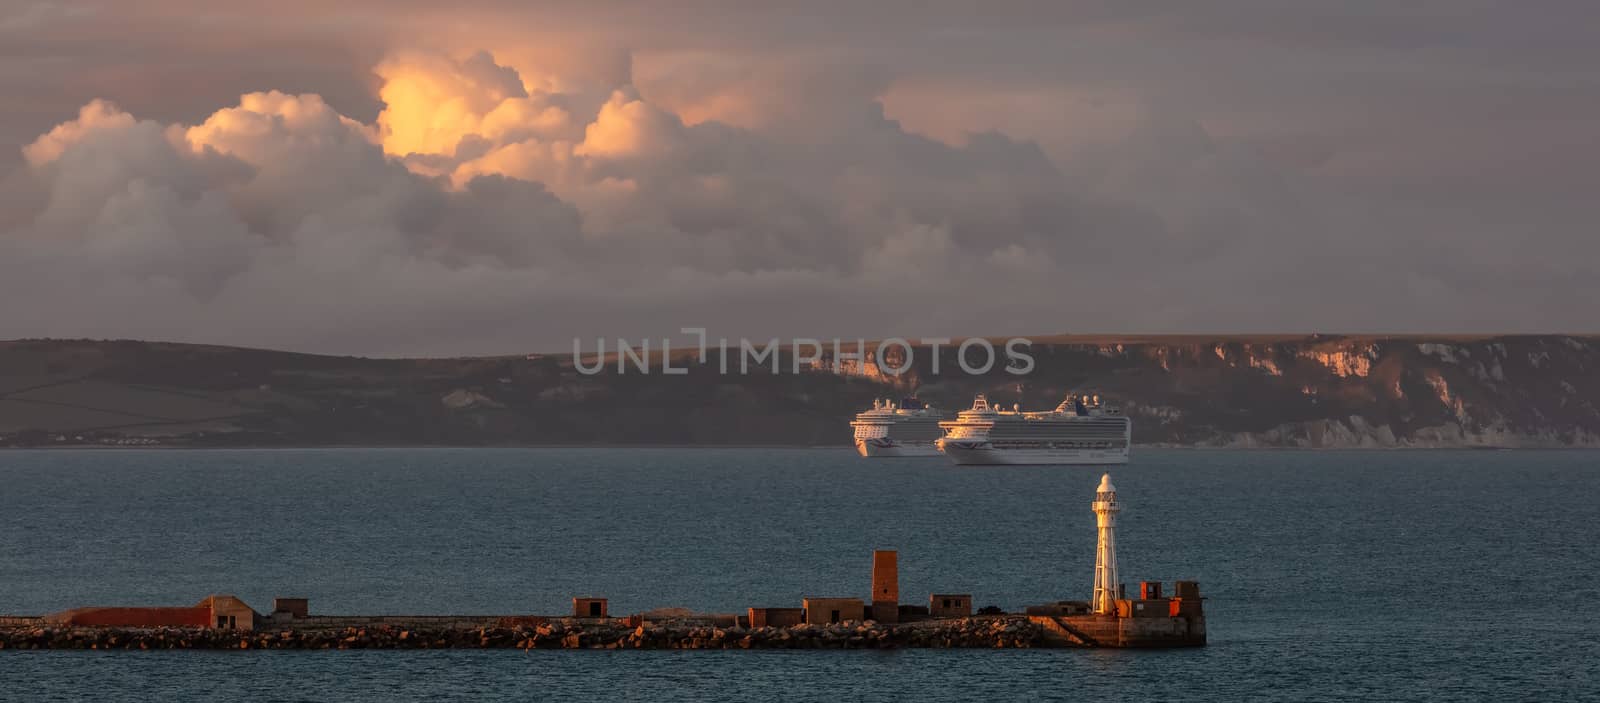 Portland, United Kingdom - July 1, 2020: Beautiful panoramic shot of Portland harbour lighthouse with two P&O cruiseships anchored in the distance in Weymouth Bay. Beautiful sunset clouds.